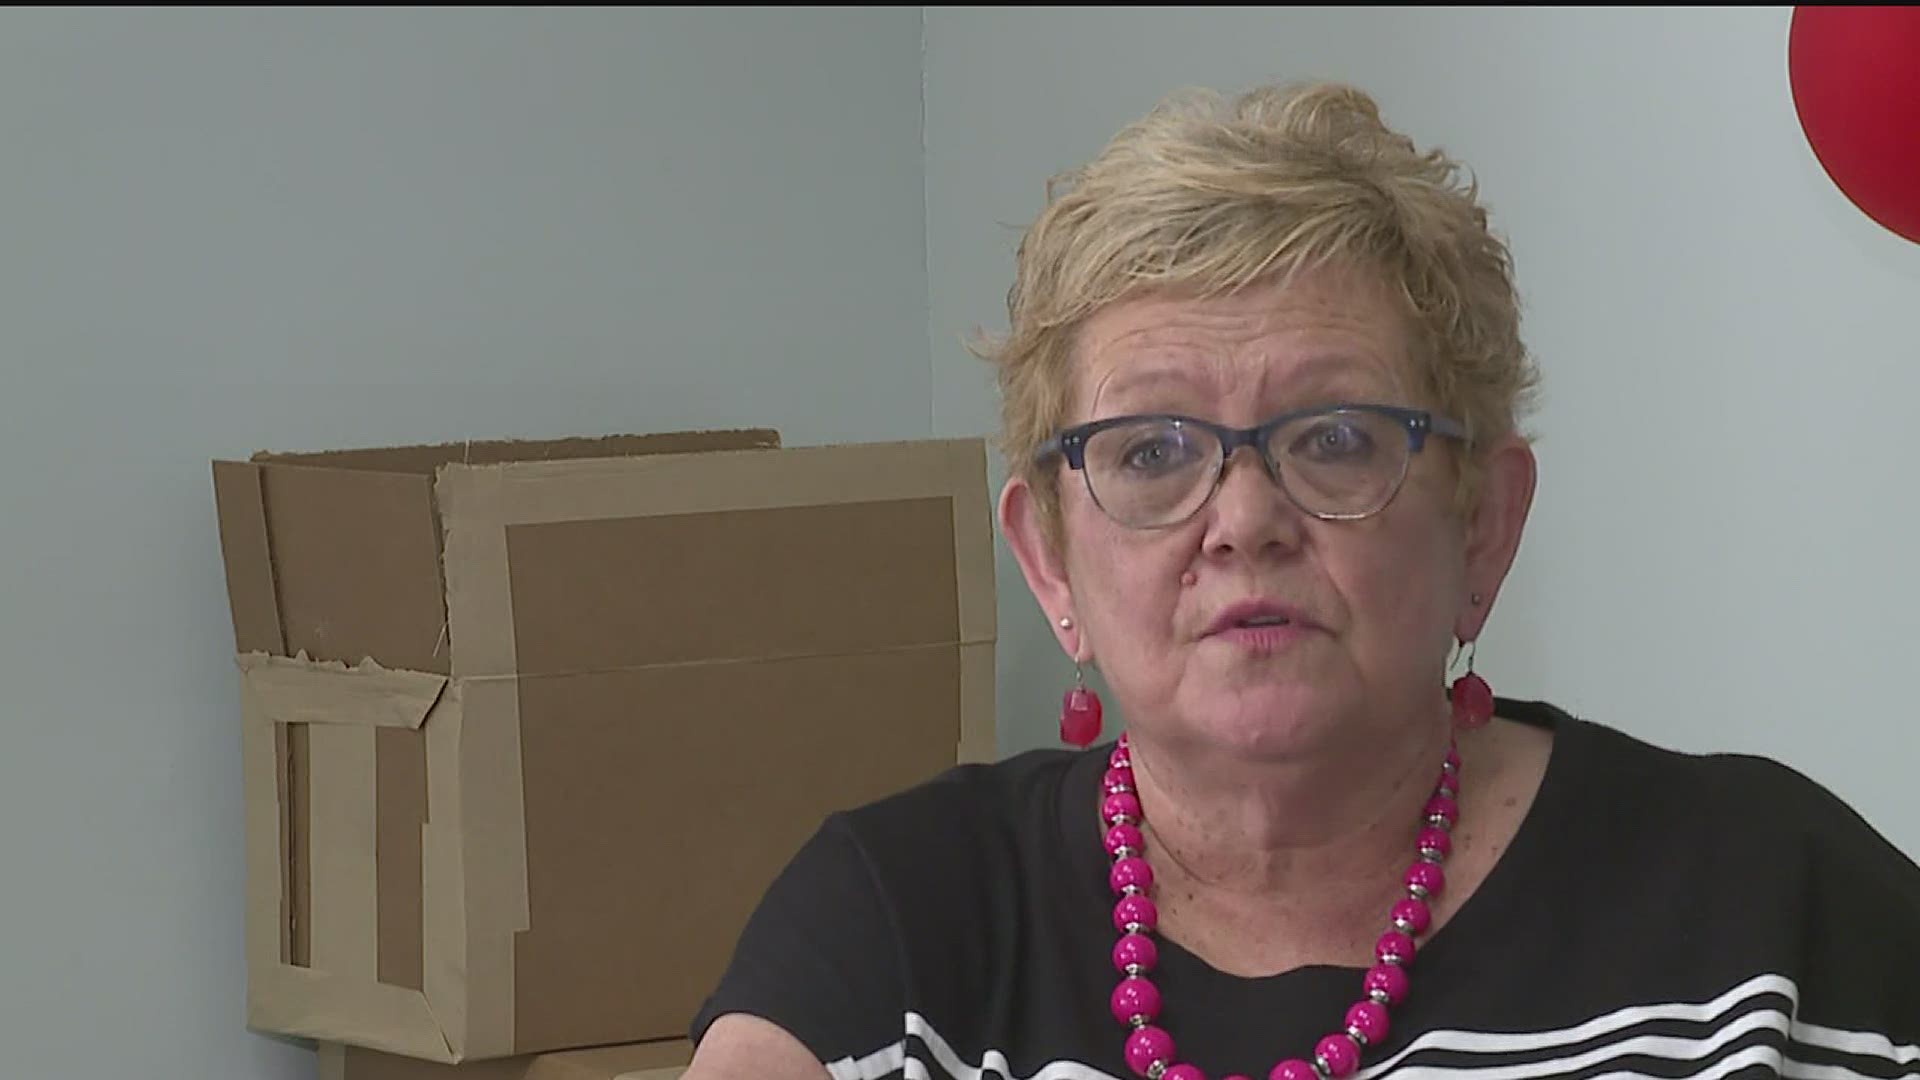 Election Day is just two and a half months away. And the Rock Island County Clerk says she's gotten twice as many ballot request forms than she got in 2016.